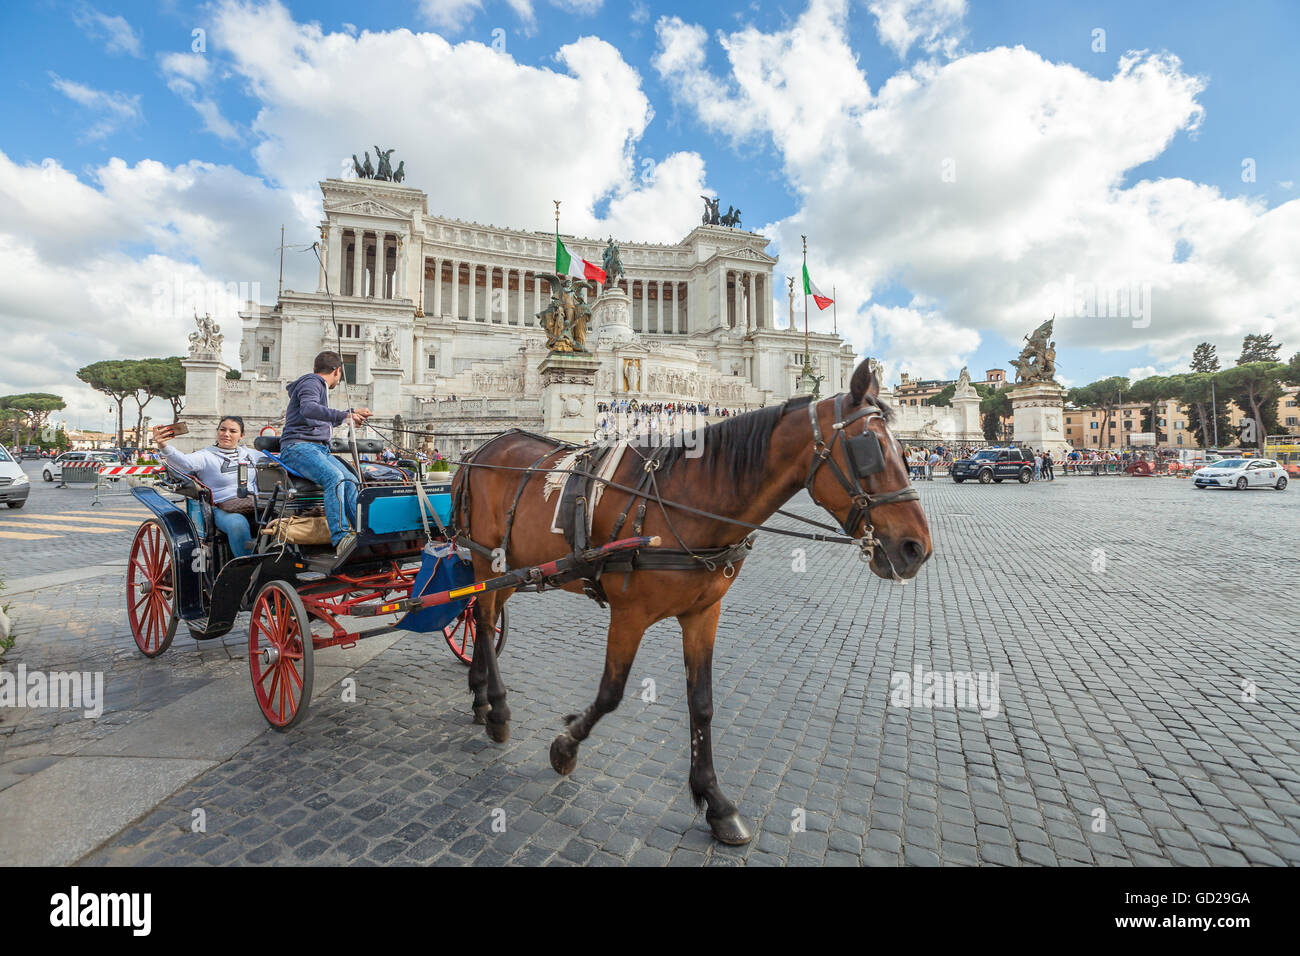 Horse carriage in Rome Stock Photo